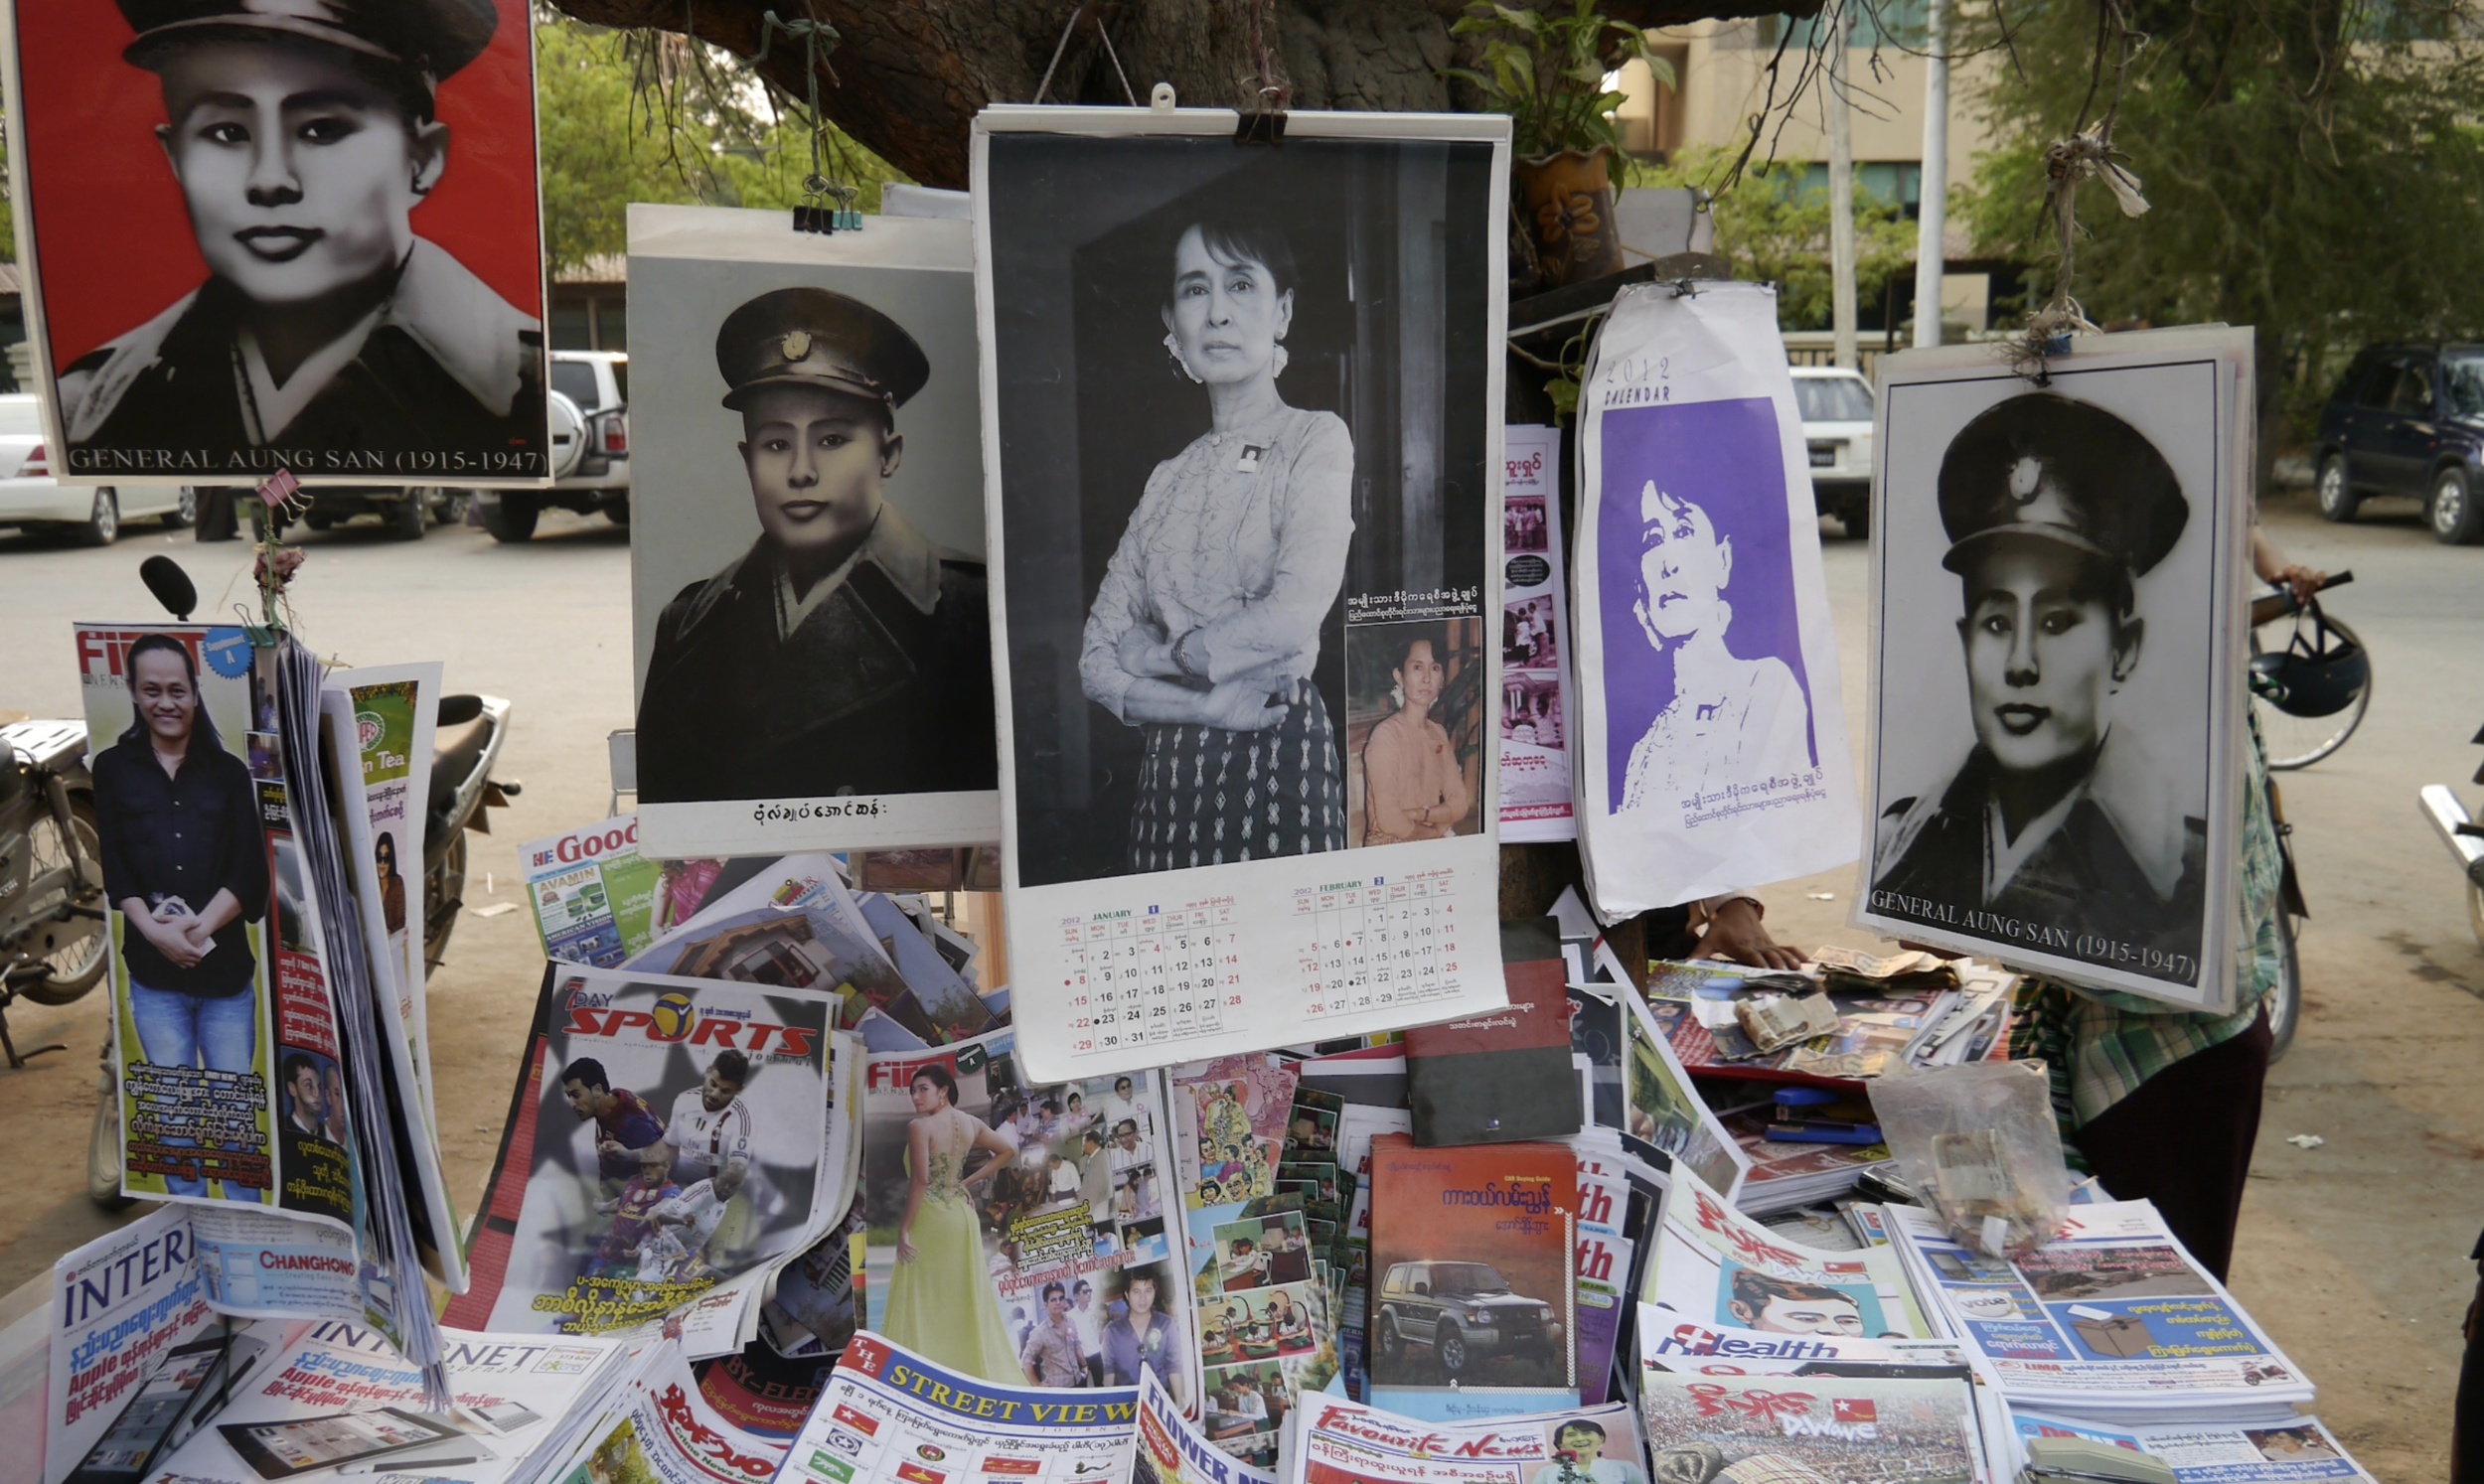  In marked contrast to the time when Suu Kyi’s image was effectively banned, today streets across Burma – like this one in the former royal capital of Mandalay – are festooned with posters and graphics of Suu Kyi and her father, General Aung San, who